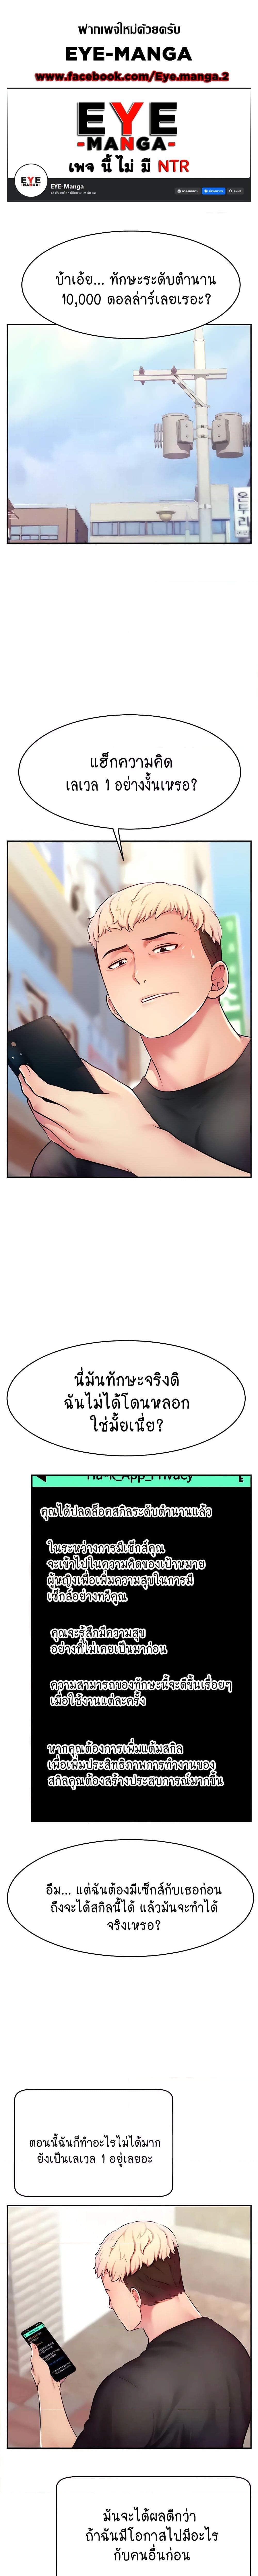 Making Friends With Streamers by Hacking! ตอนที่ 4 ภาพ 0